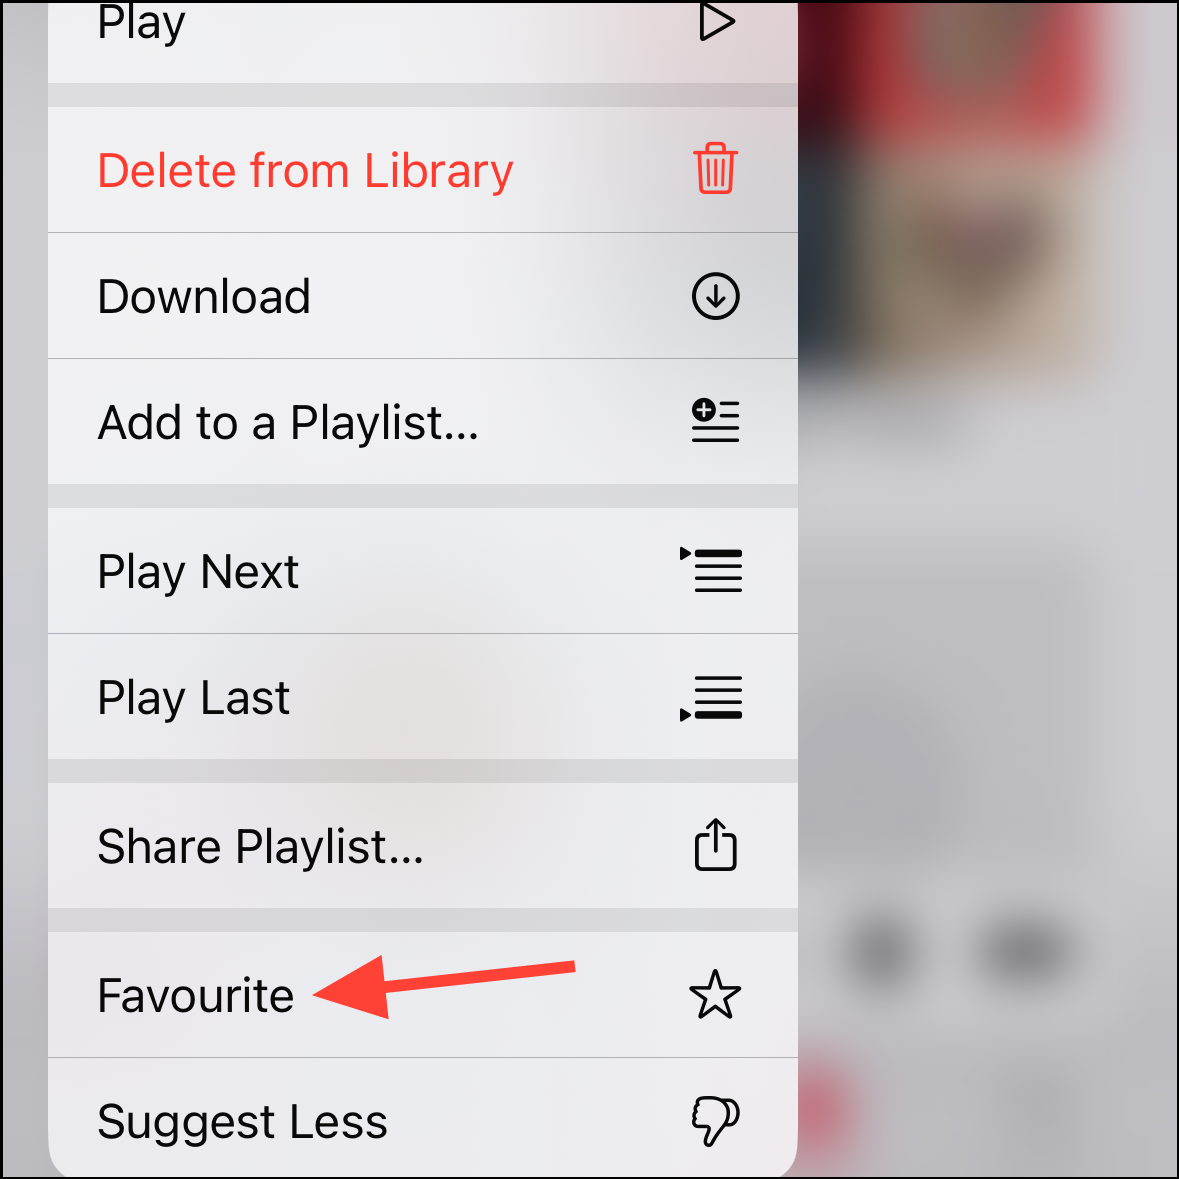 How to Filter and View Your Favourite Songs, Playlists, and Albums in Apple Music